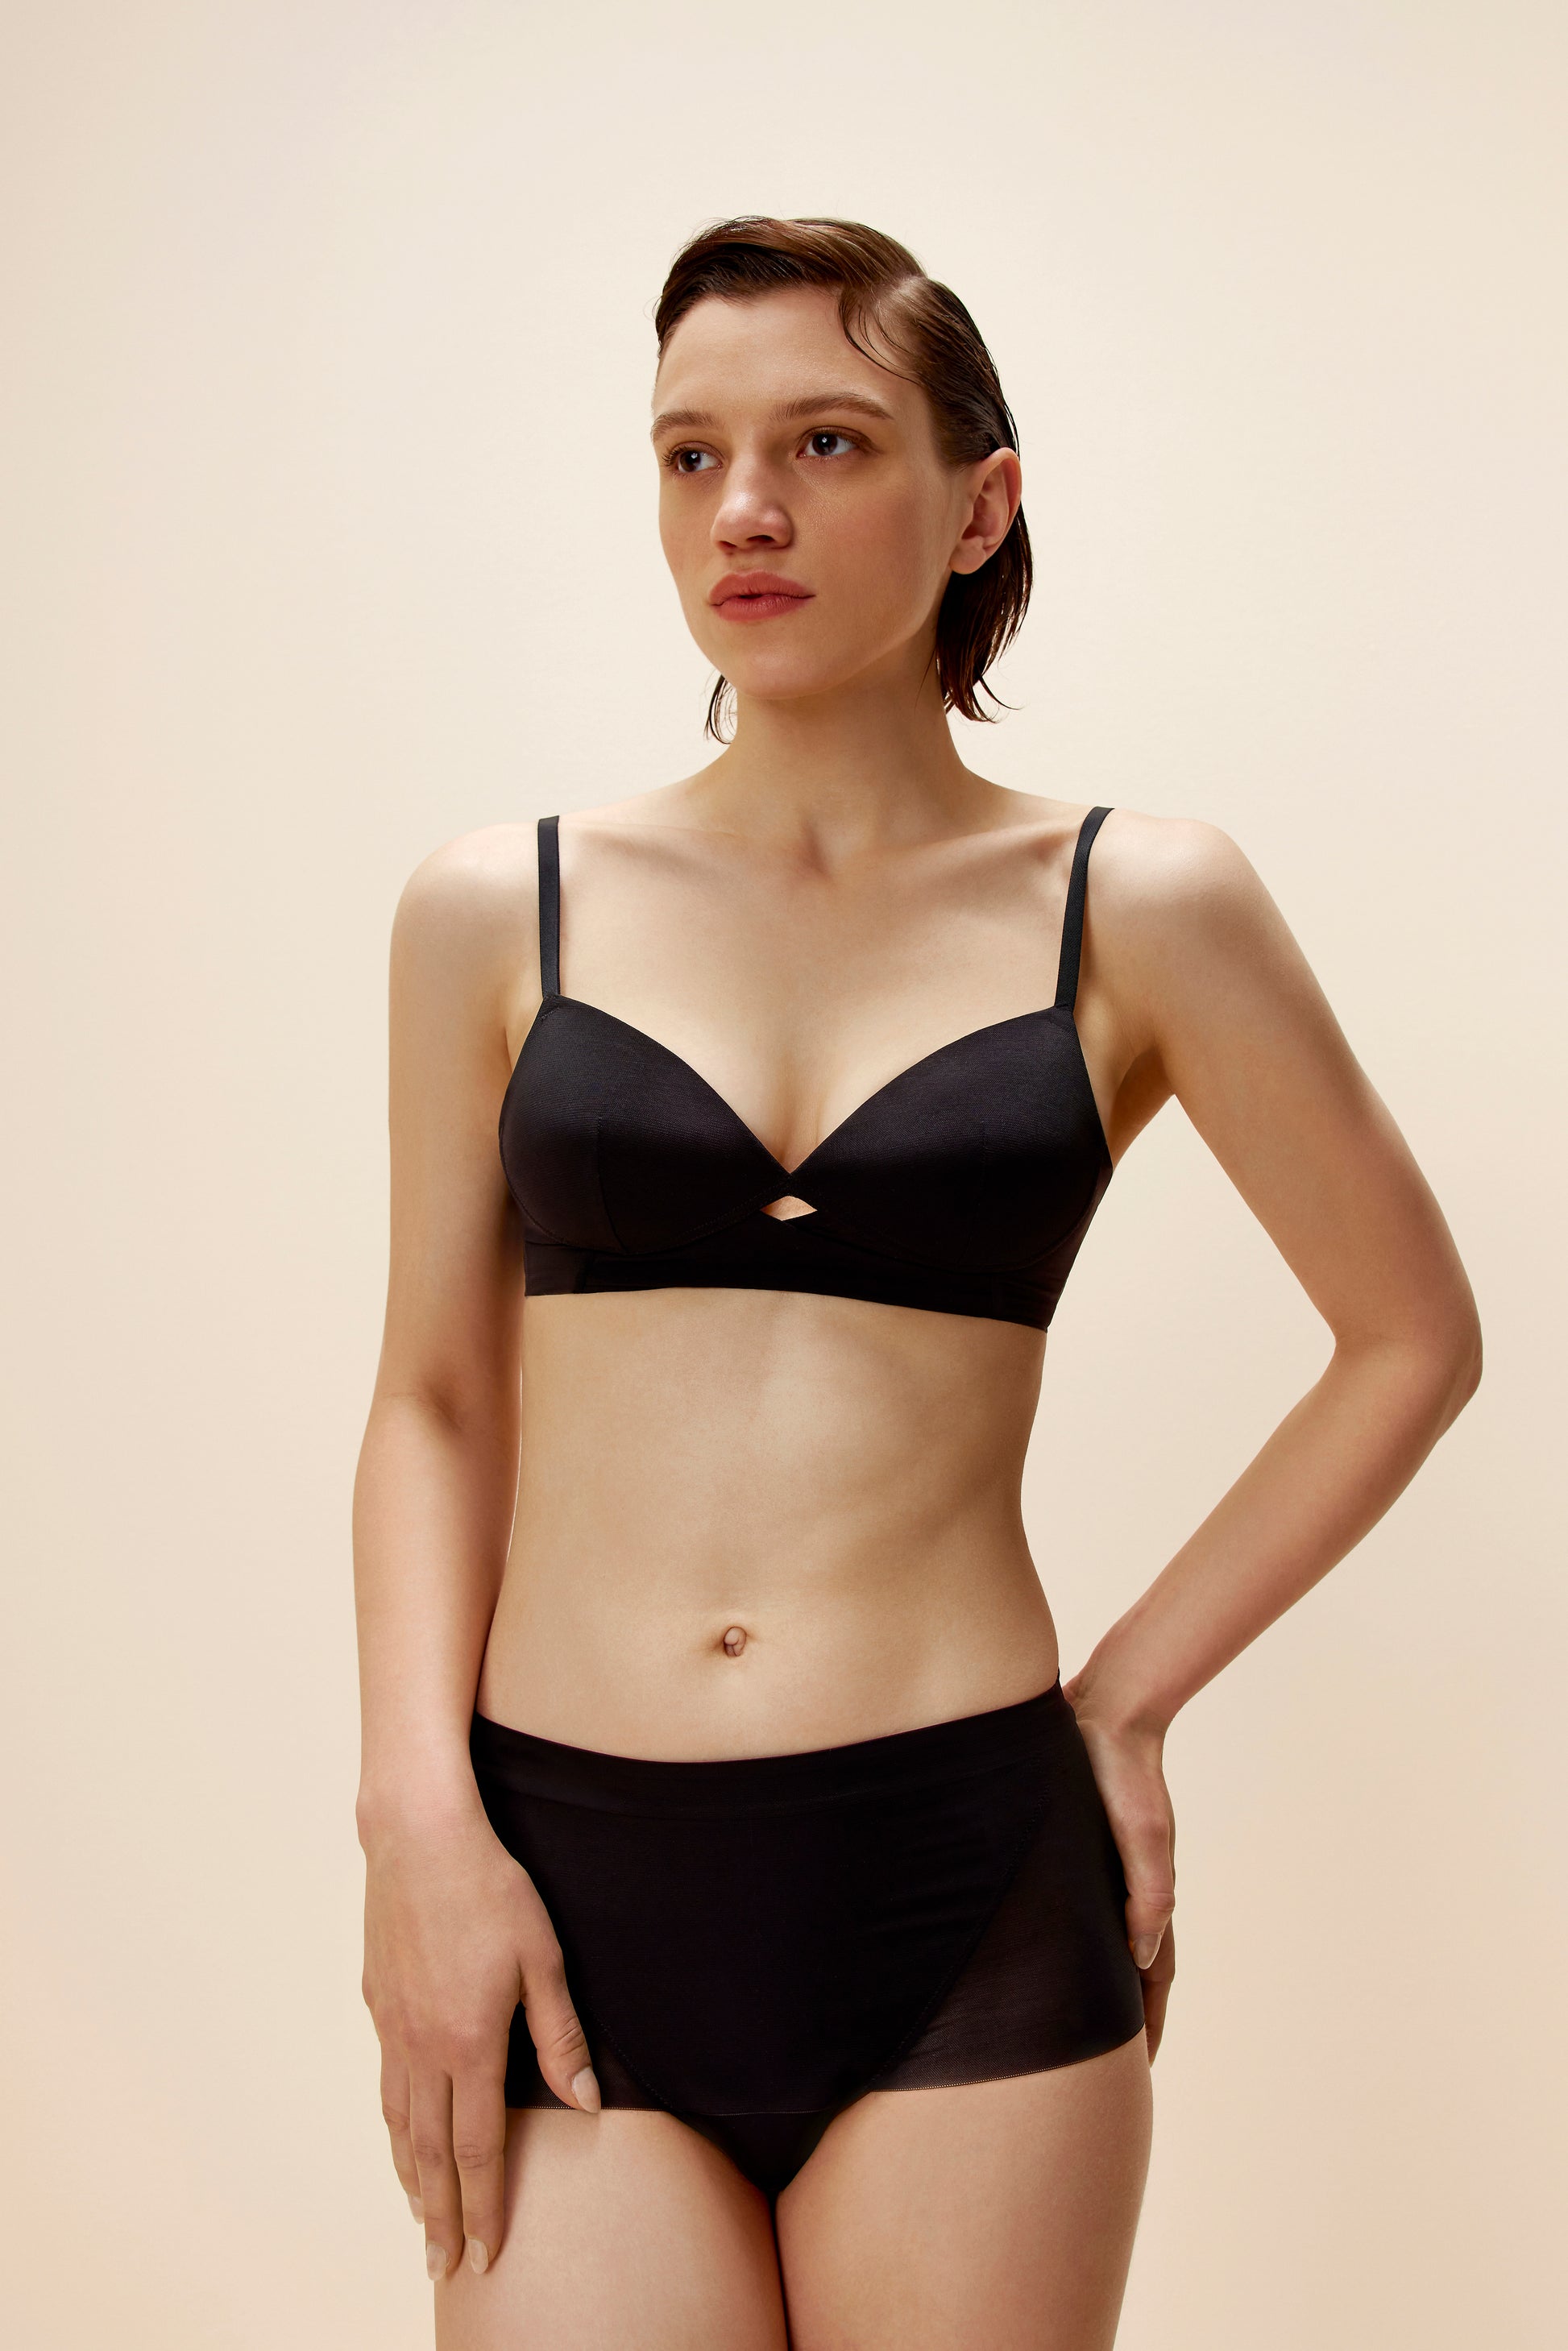 woman wearing black bra and brief